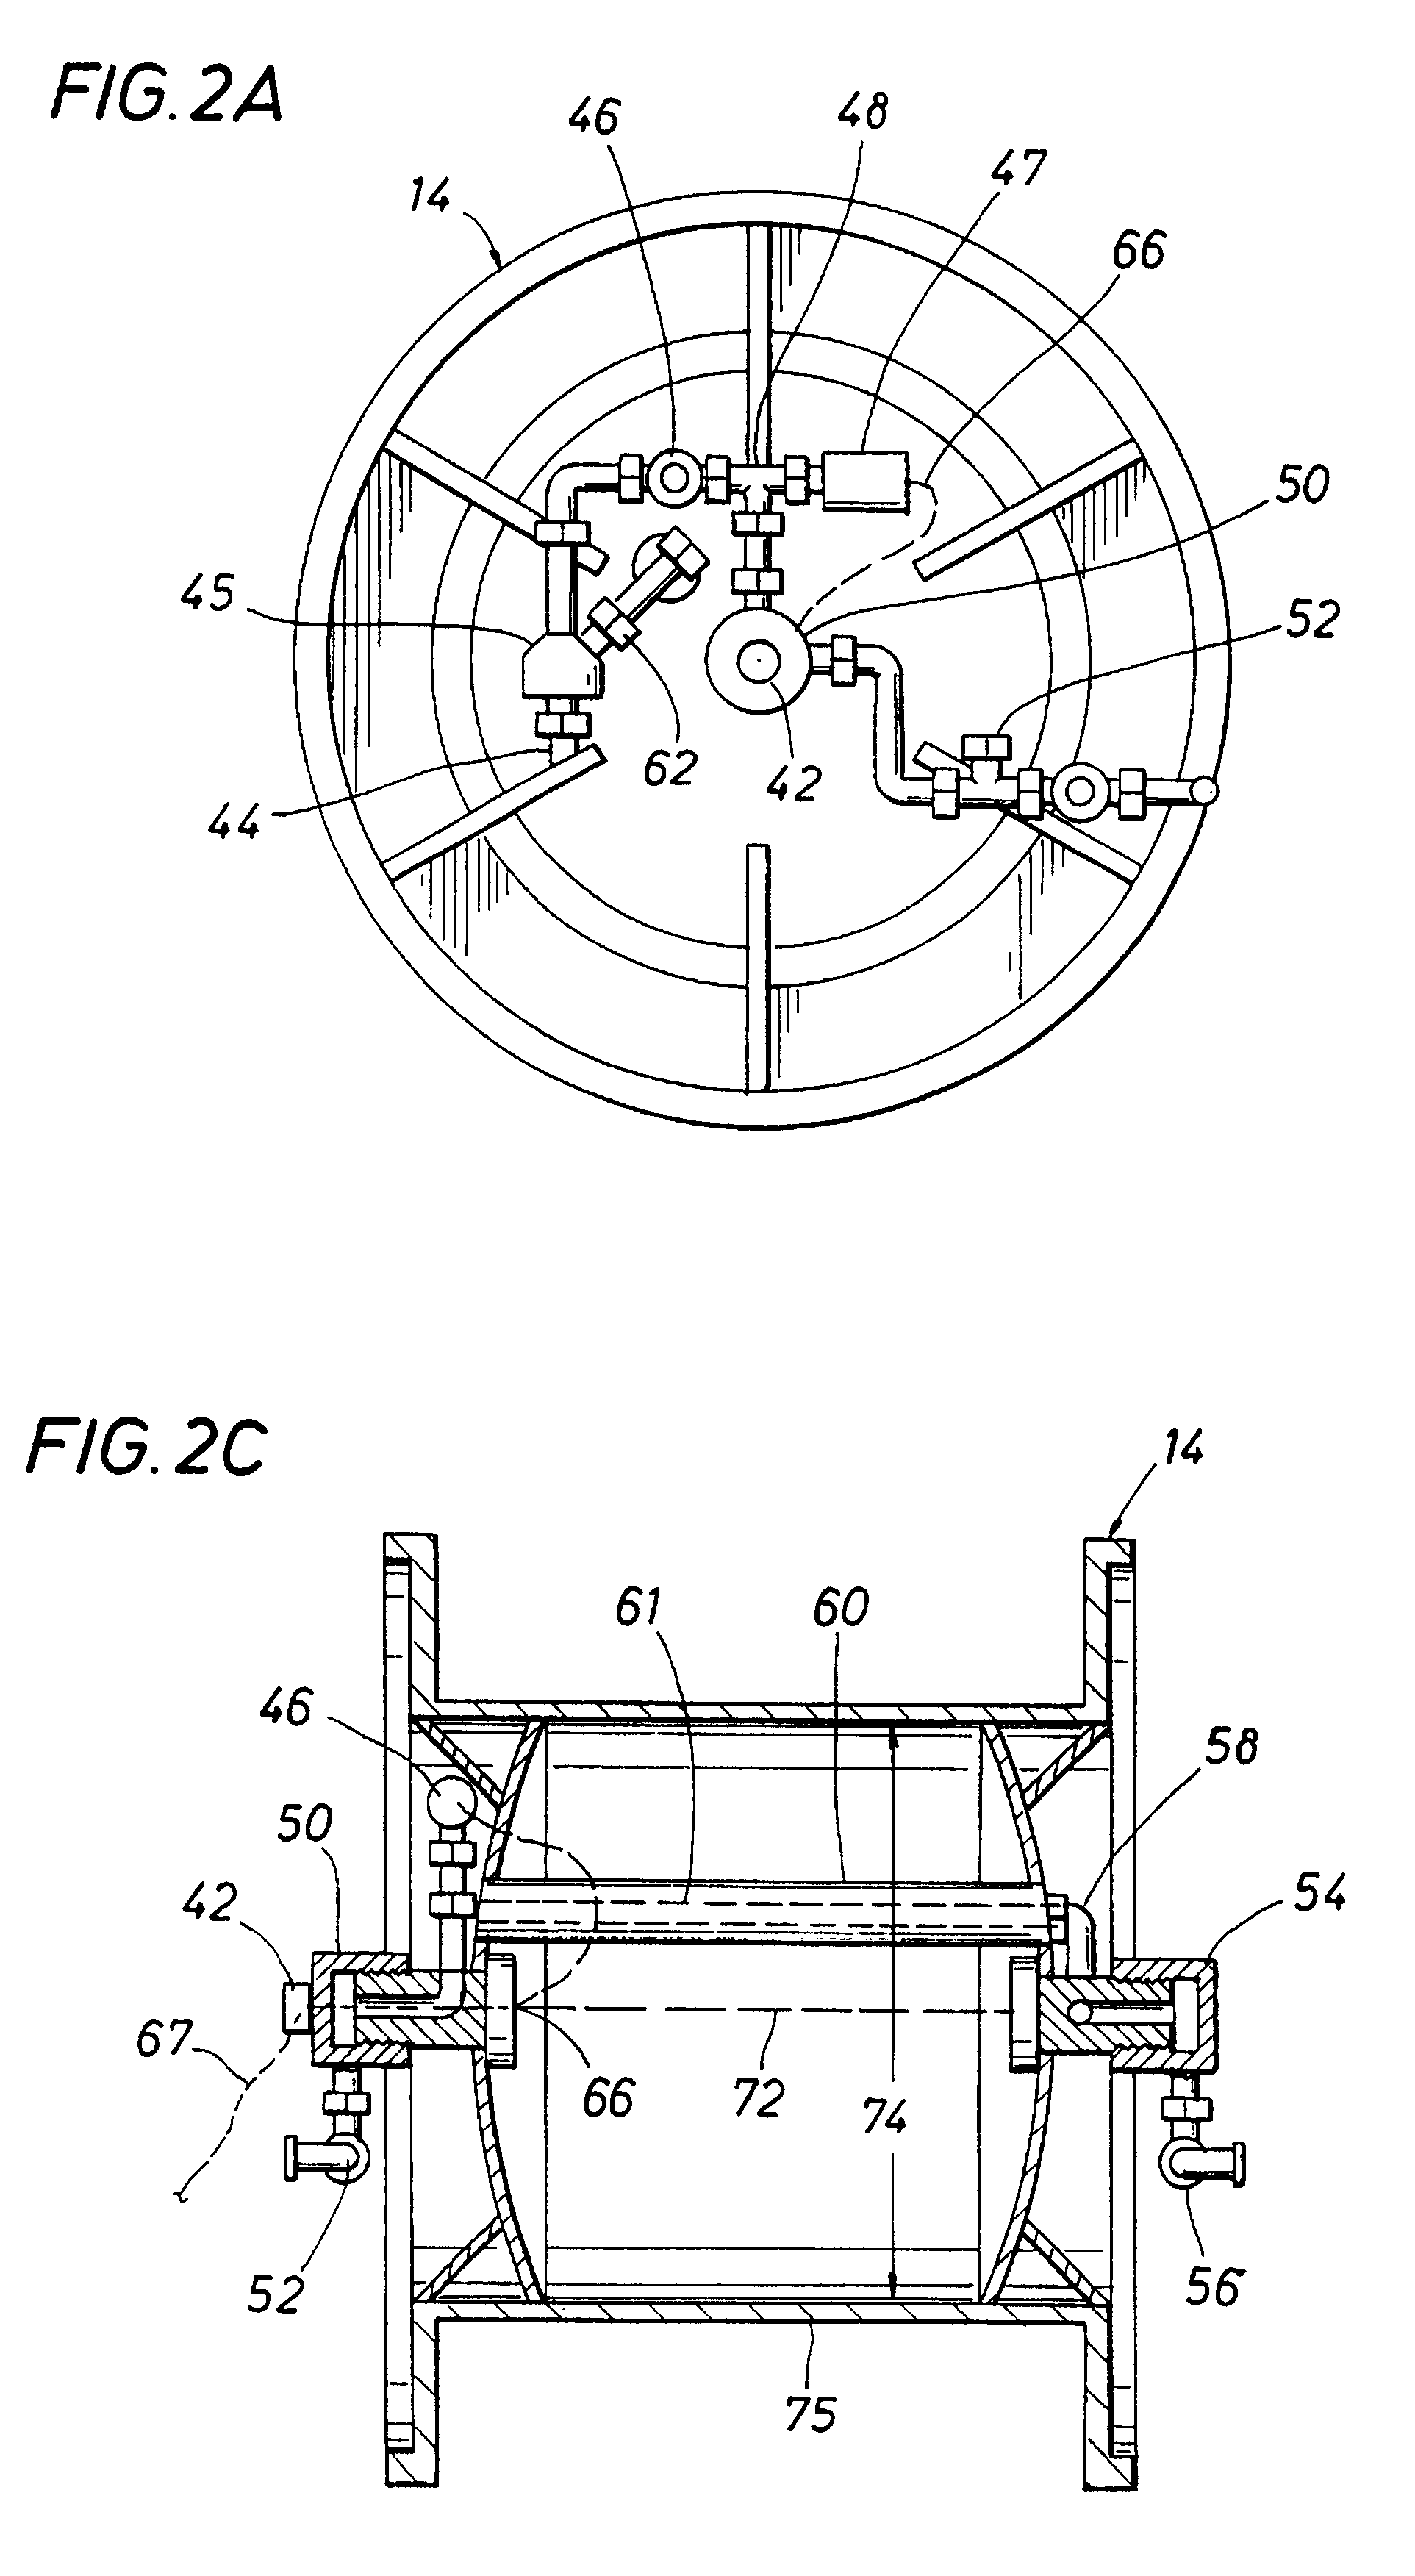 Method and apparatus using coiled-in-coiled tubing